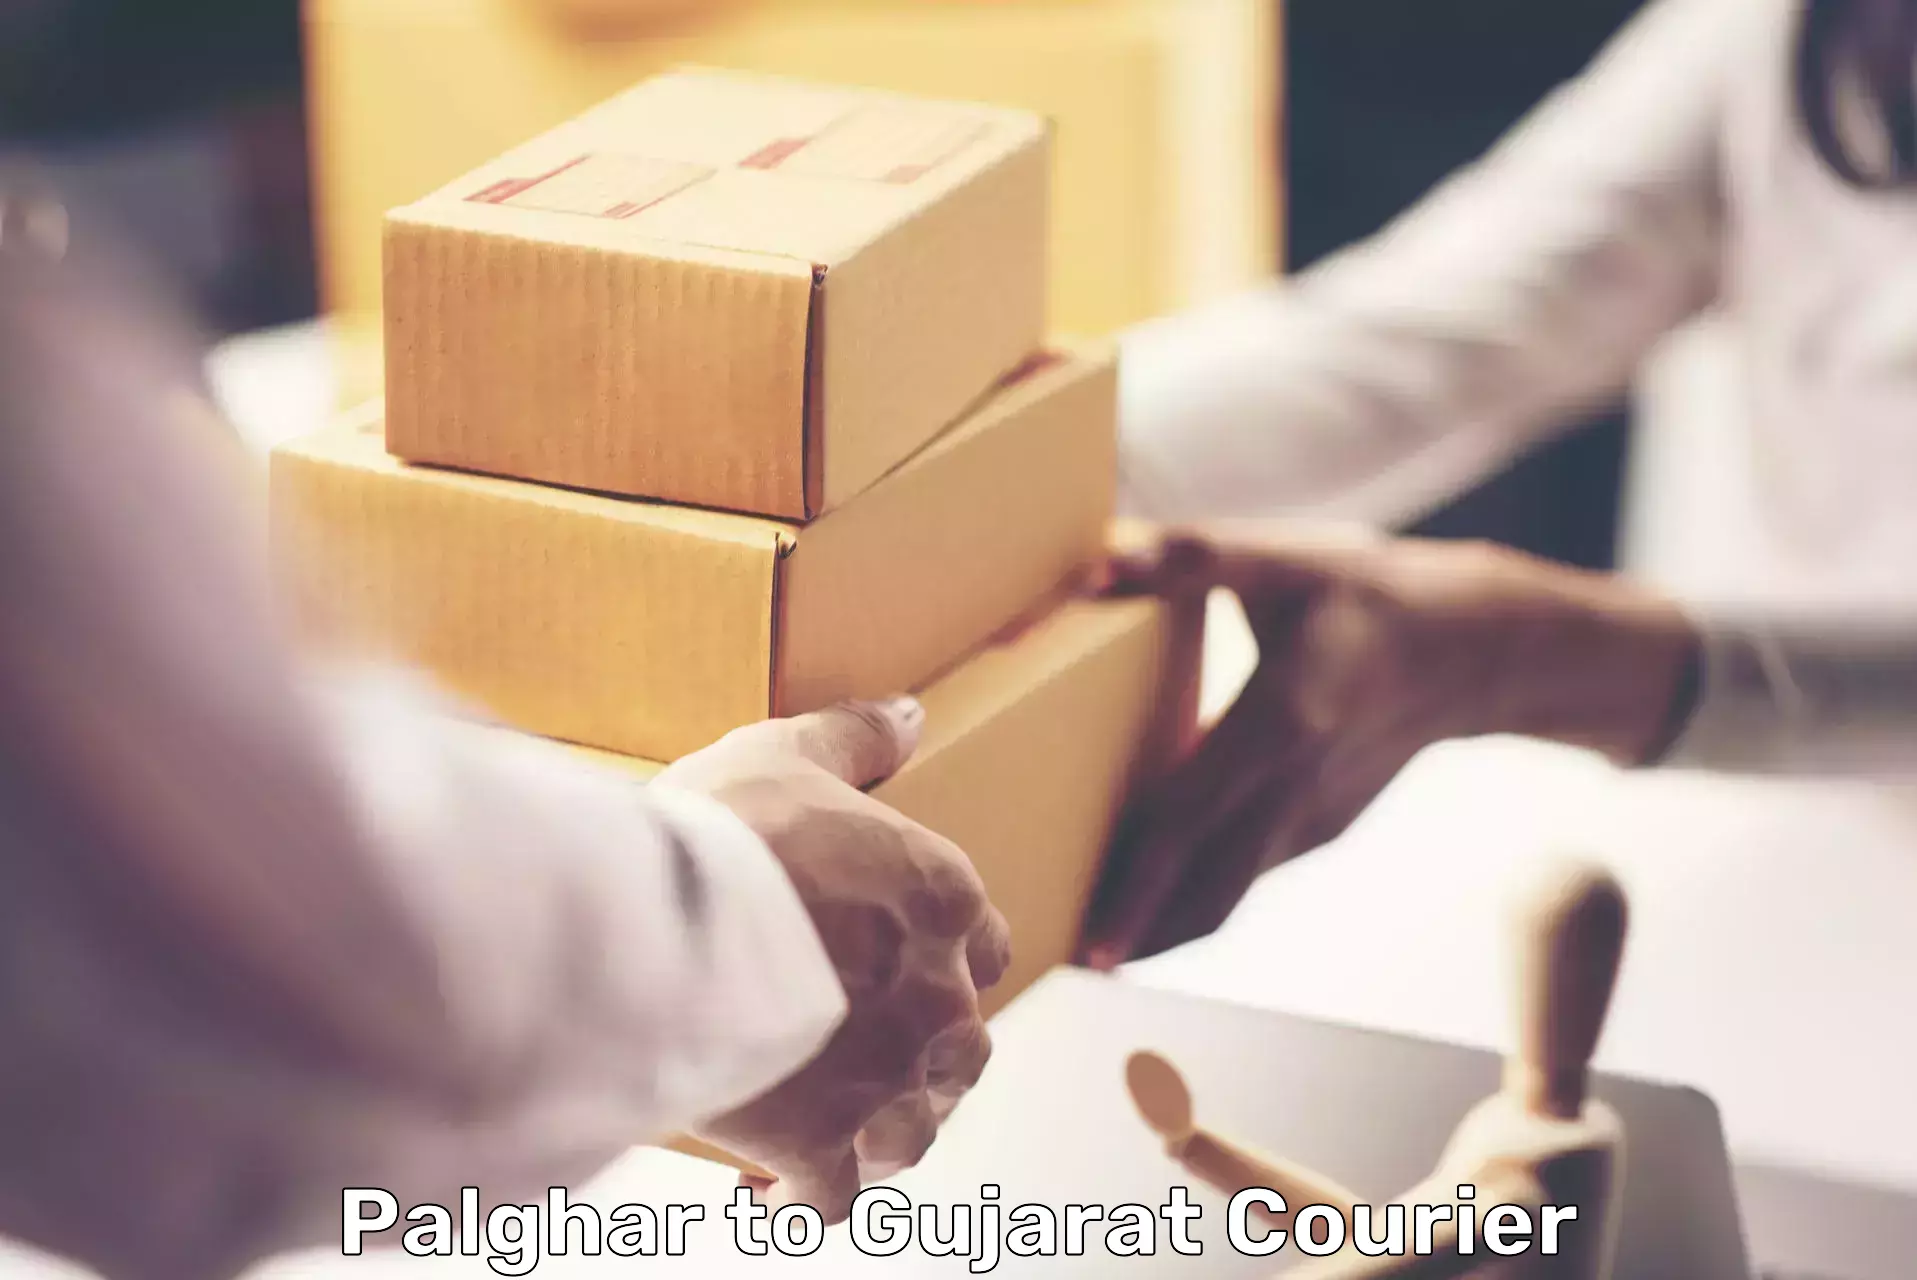 Reliable courier service in Palghar to Junagadh